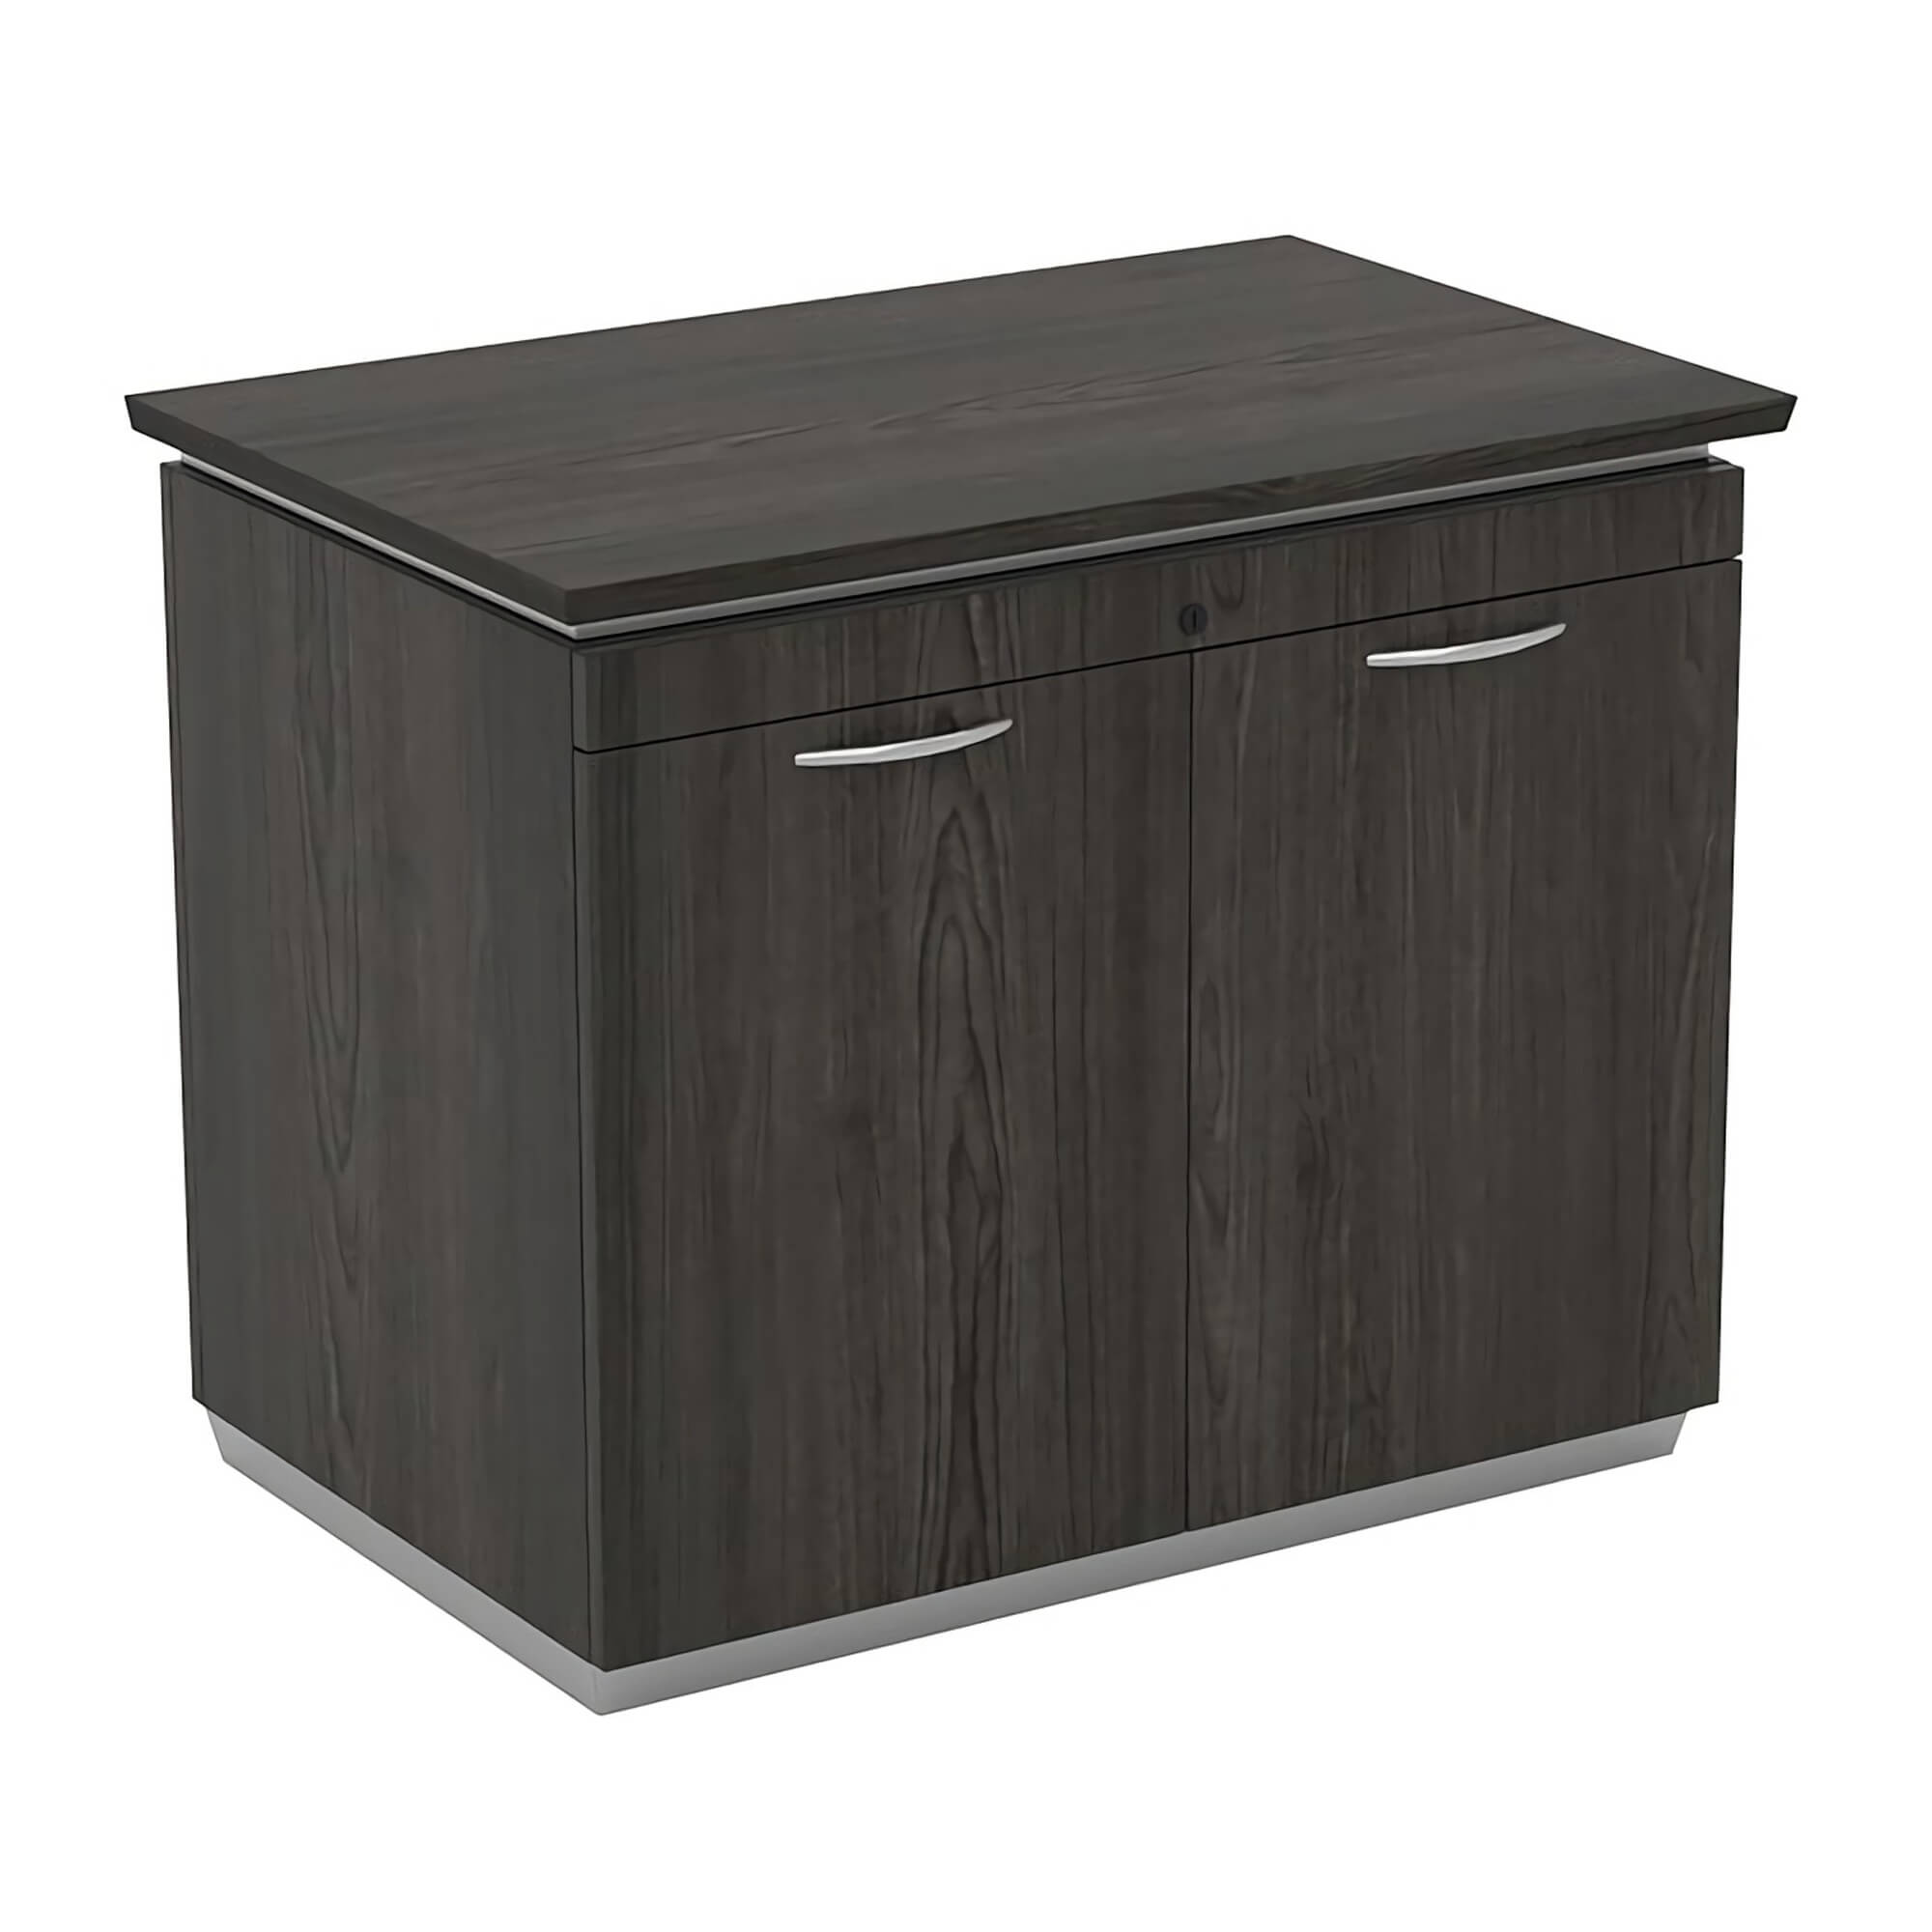 Black tie conference room tables office storage cabinet 36 inch 1